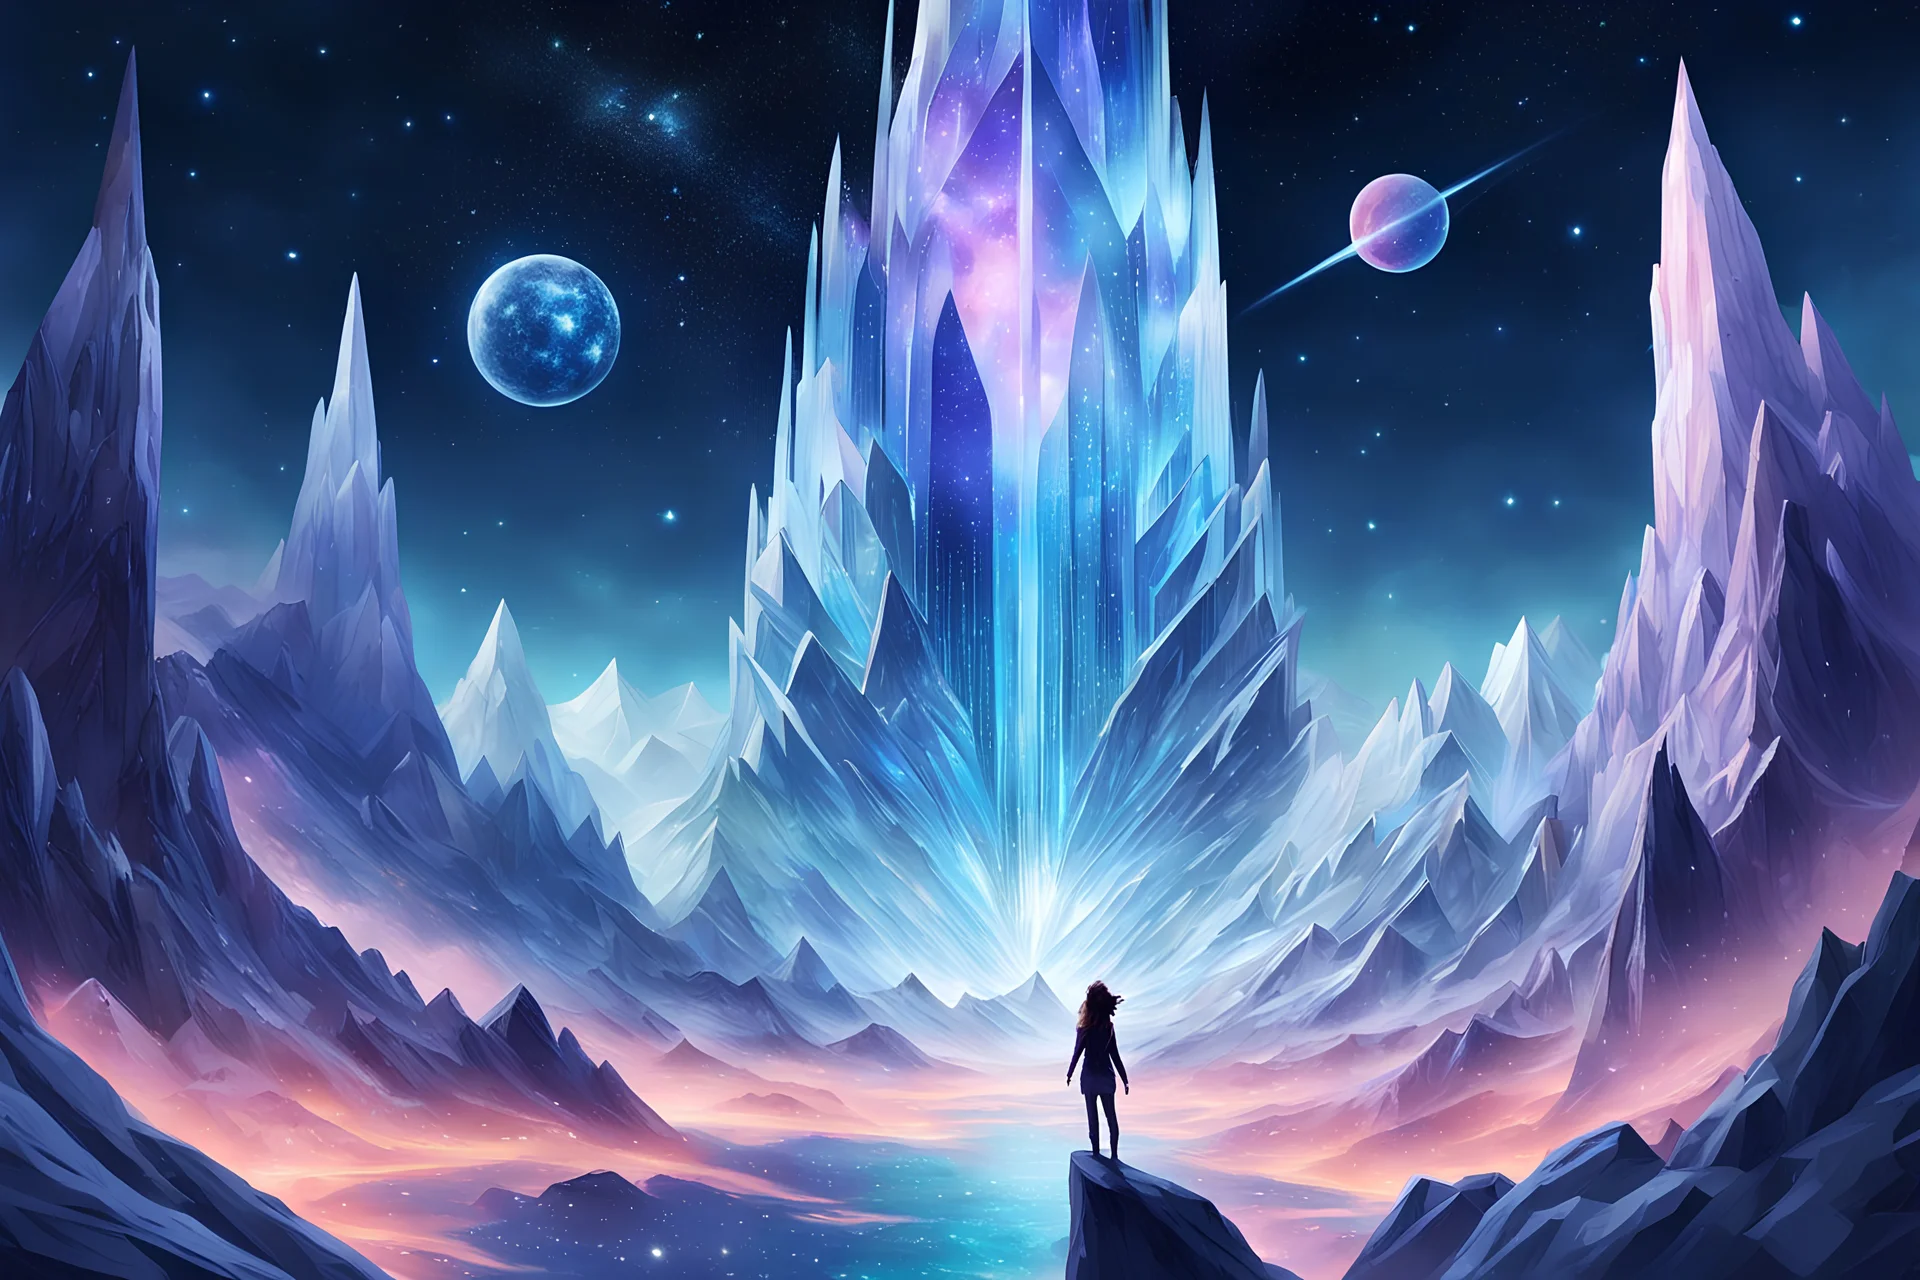 Create an image of daring climb up the Crystal Peaks, surrounded by towering crystals that reflect the starry skies above, as she nears the realm of the elusive Starweaver with vessels in the sky